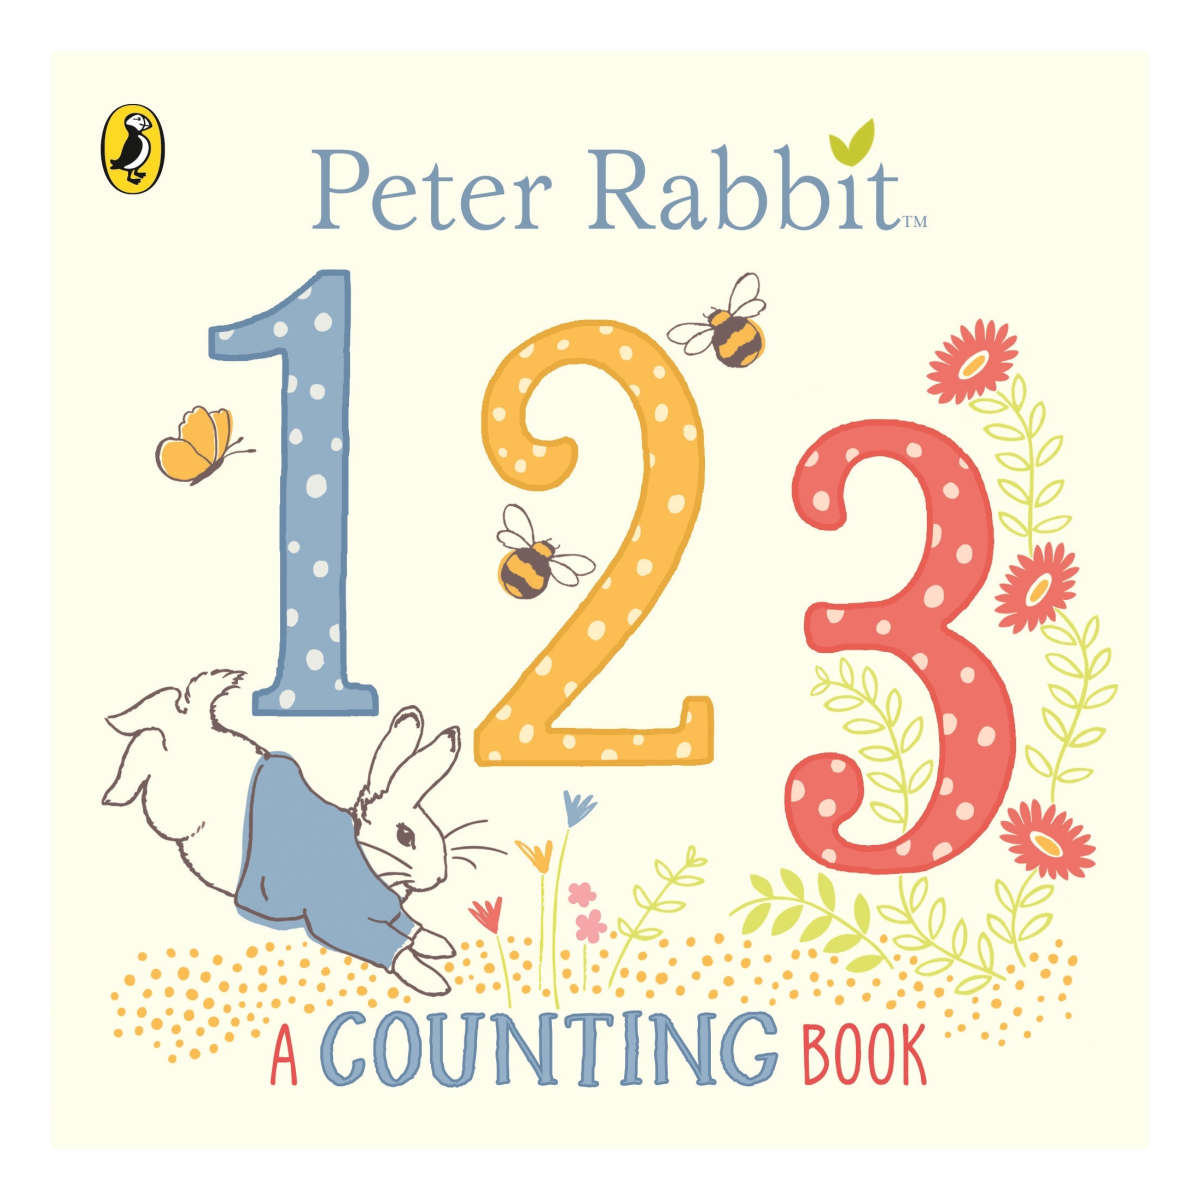 Peter Rabbit - 123 A Counting Book